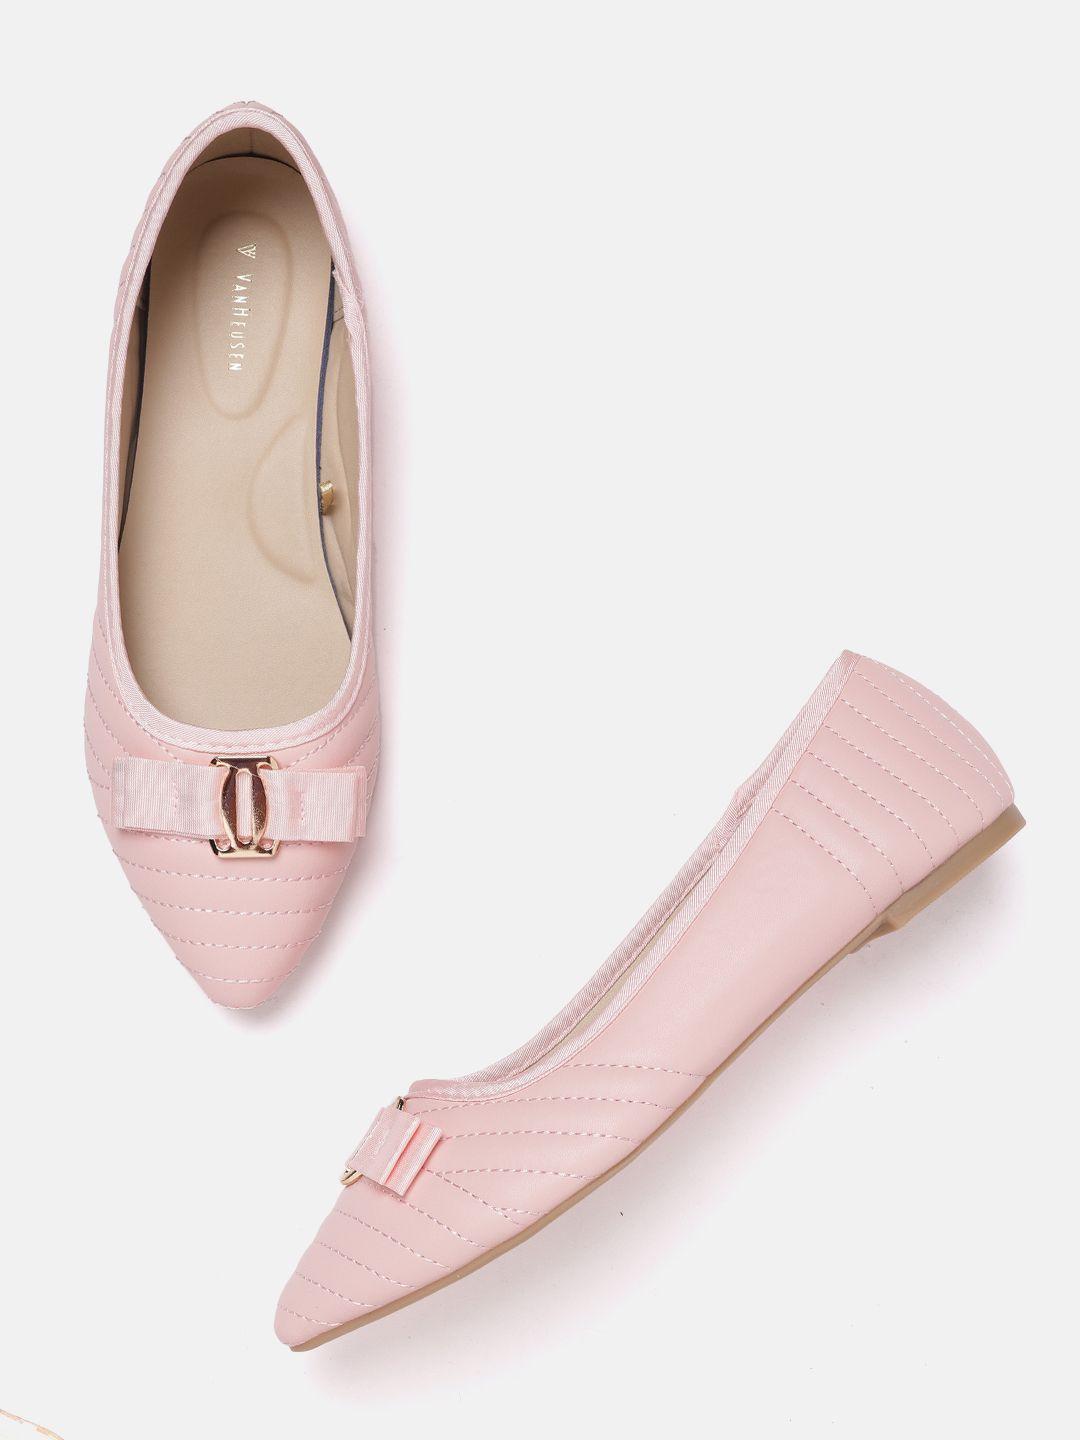 Van Heusen Woman Pink Solid Ballerinas with Bow Detail